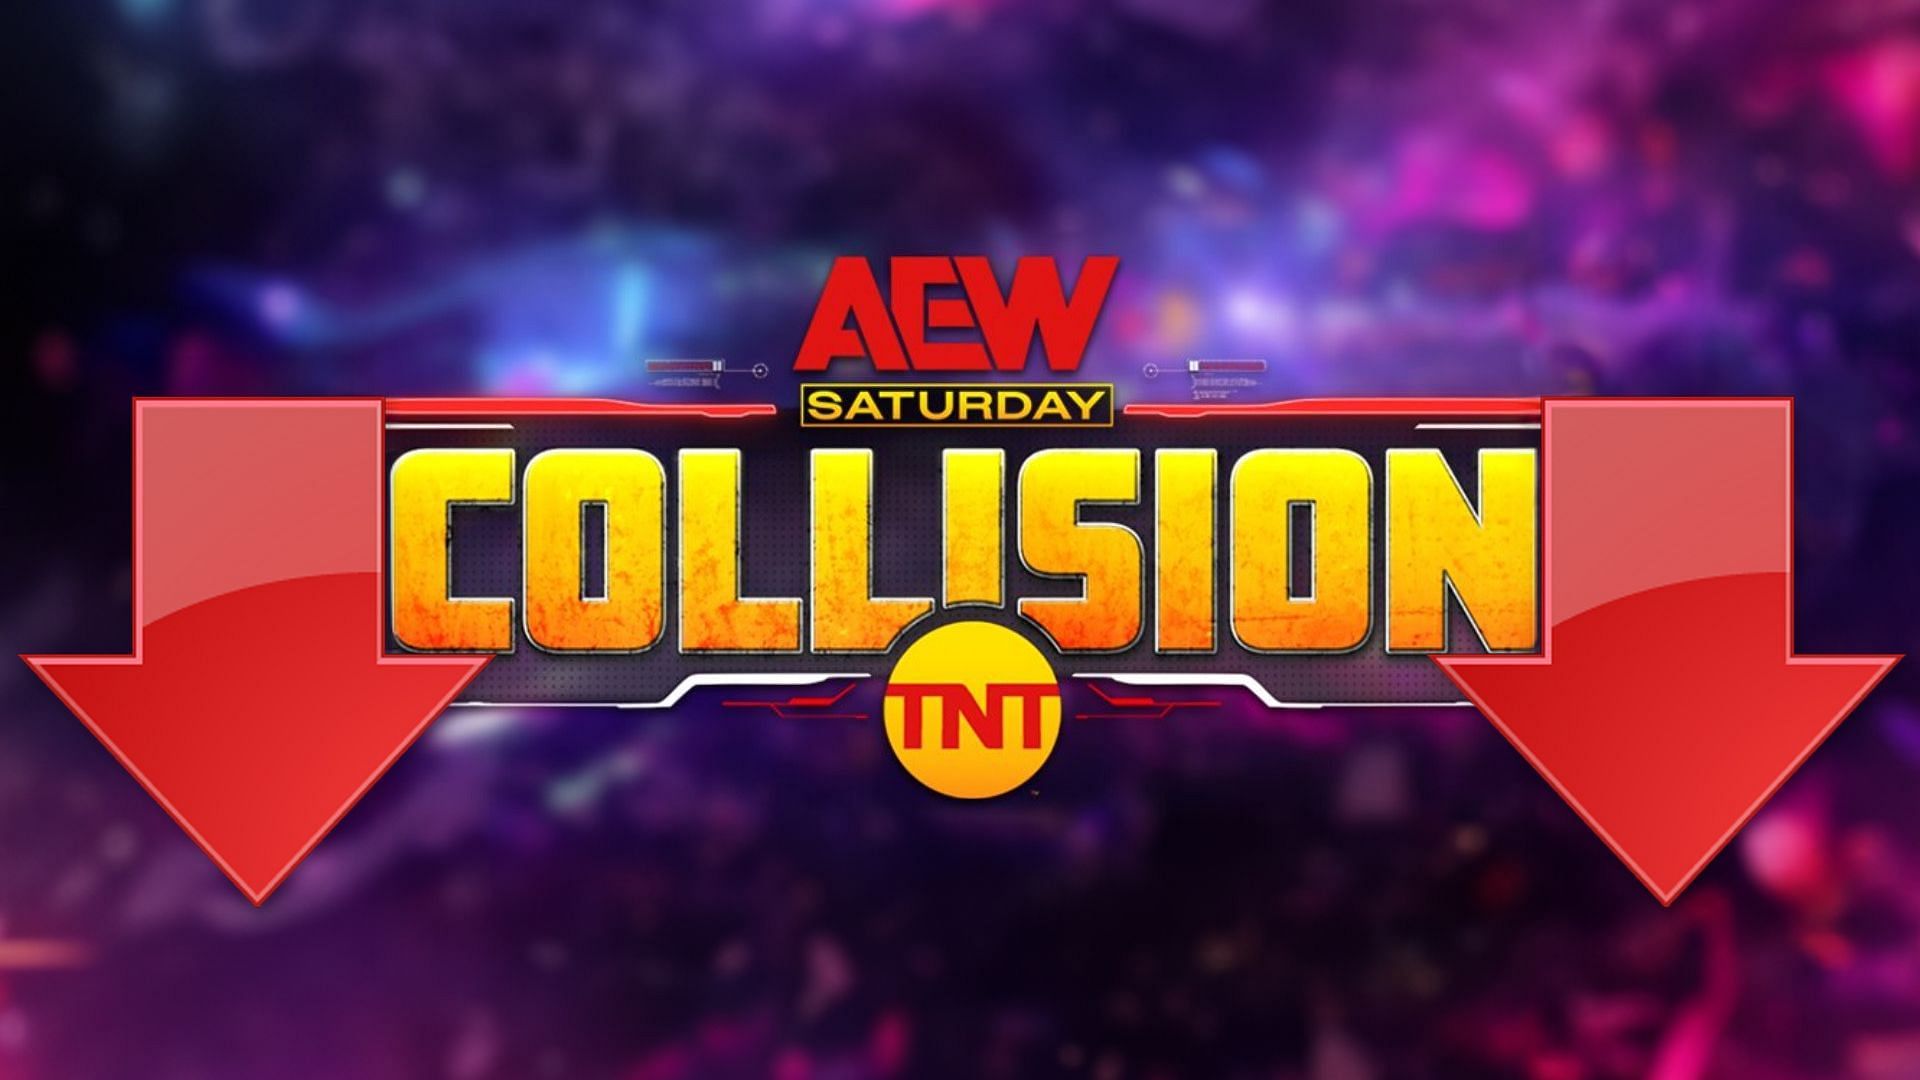 AEW Collision suffered a big drop against SmackDown